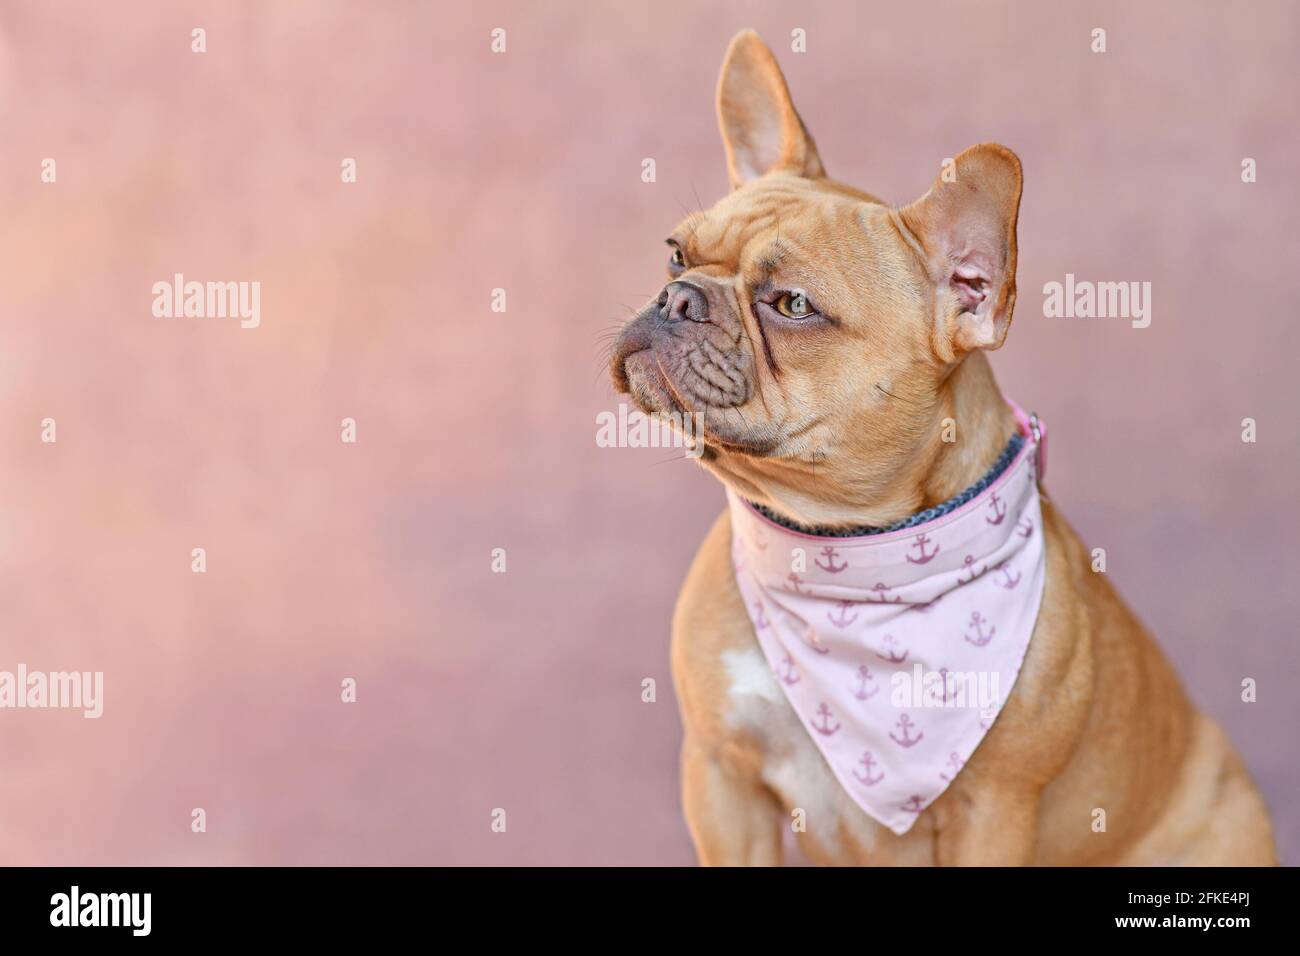 Red French Bulldog dog with neckerchief collar on side of pink background with copy space Stock Photo